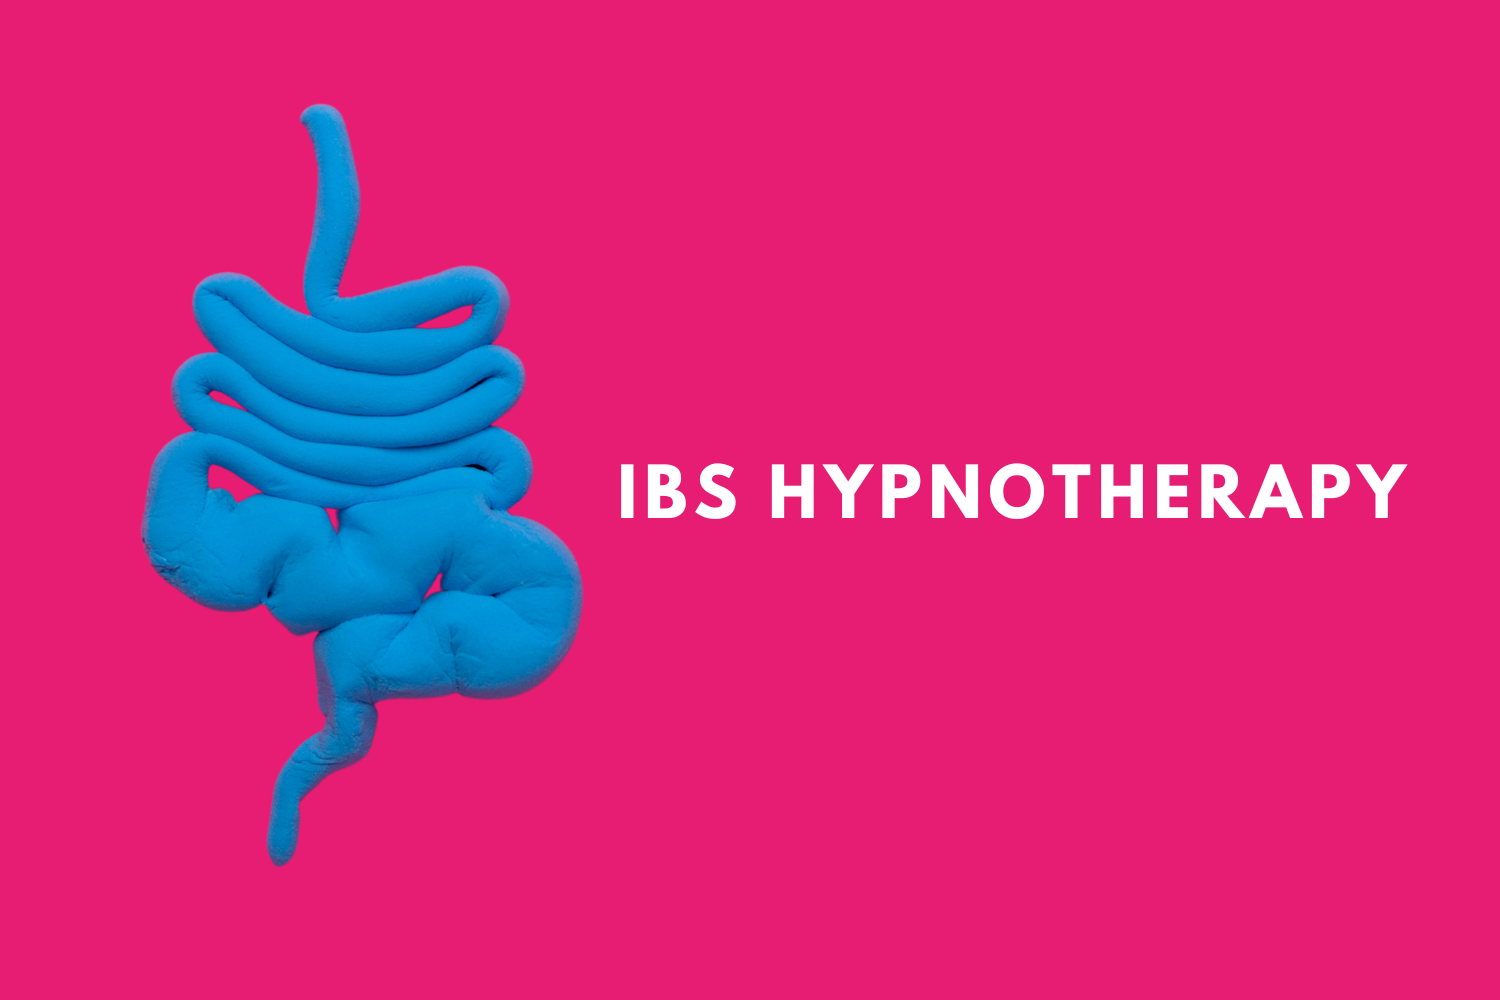 IBS Hypnotherapy